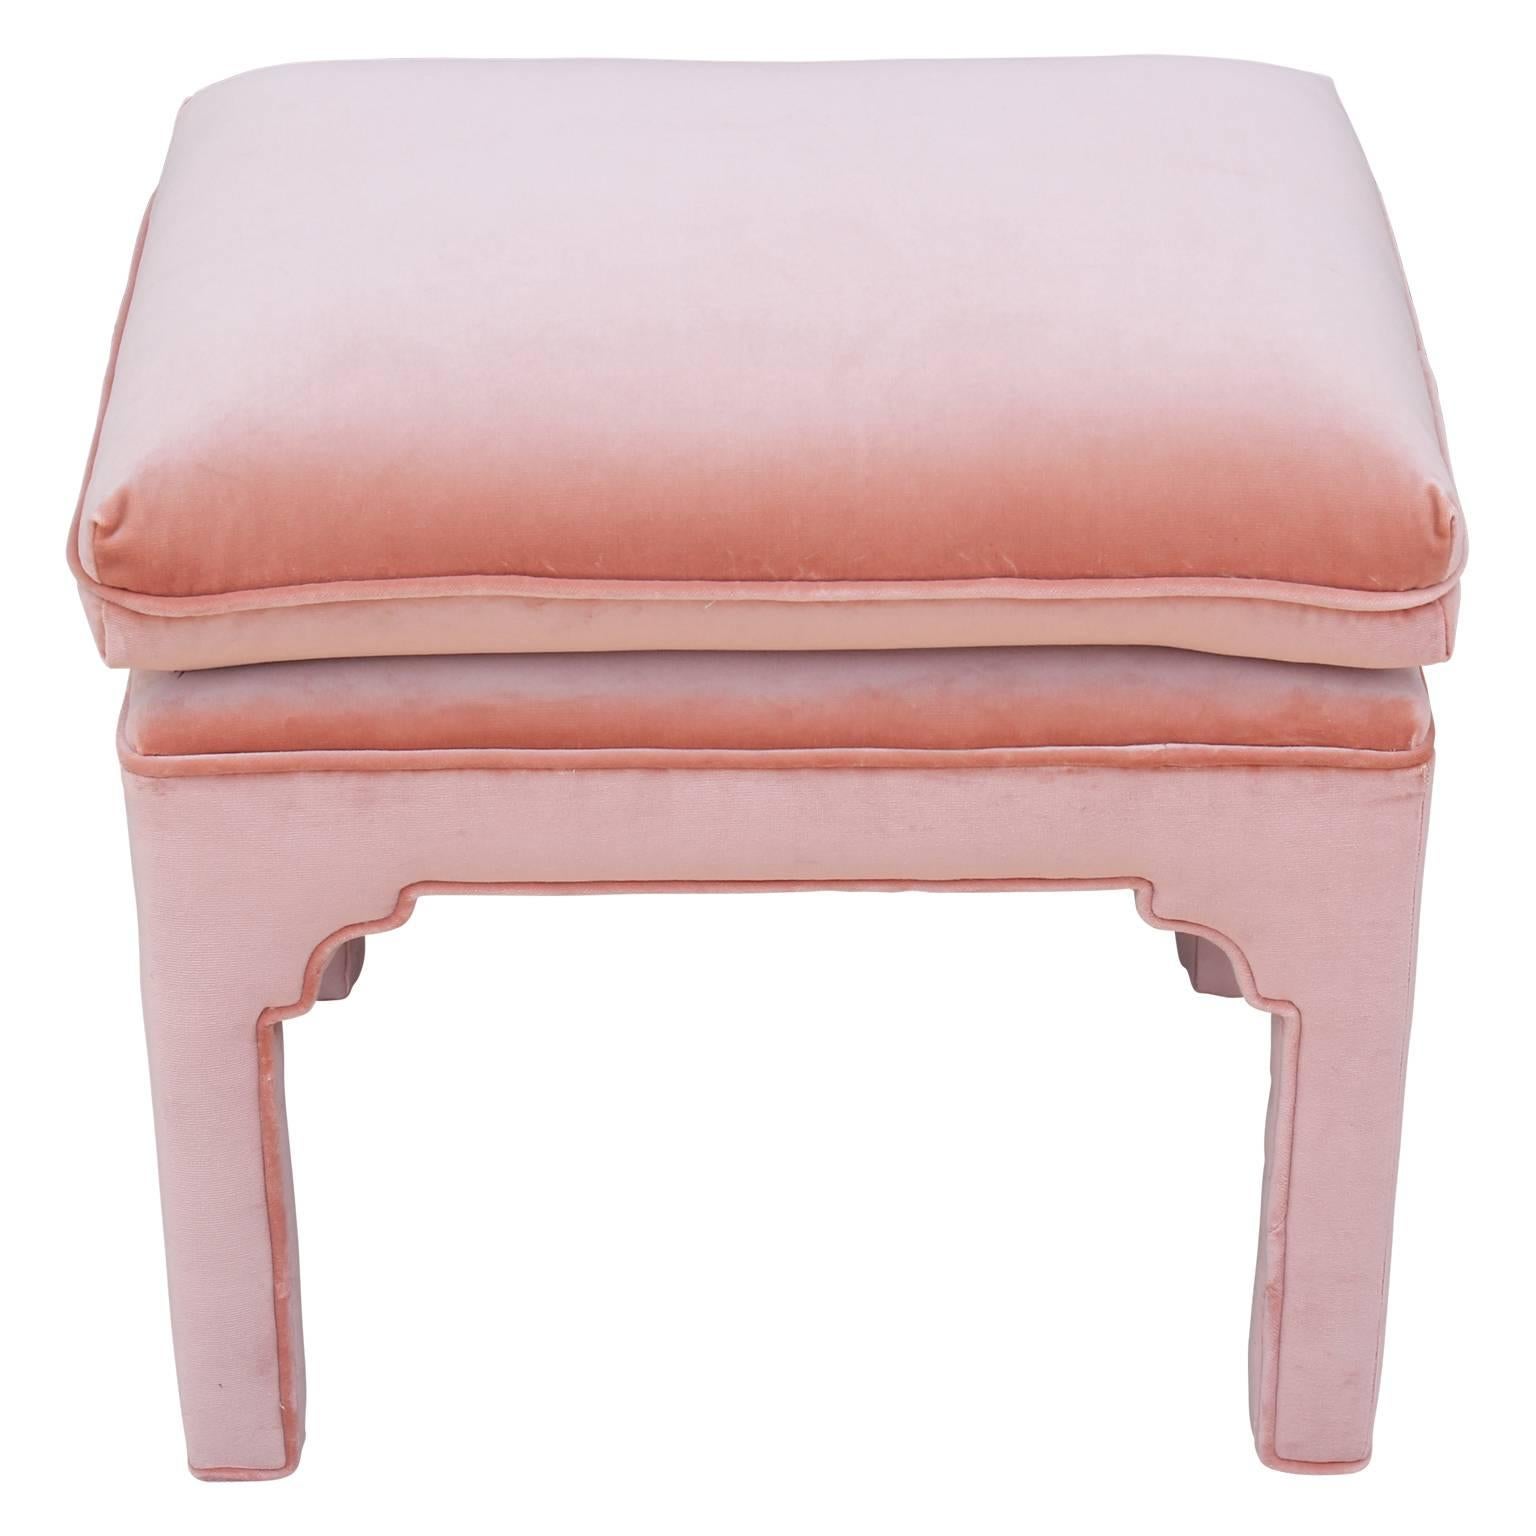 Gorgeous pair of bold Hollywood Regency footstools fully upholstered in lush light pink Kravet velvet. Attributed to Grosfeld House and Baker, these are a great addition to any room.